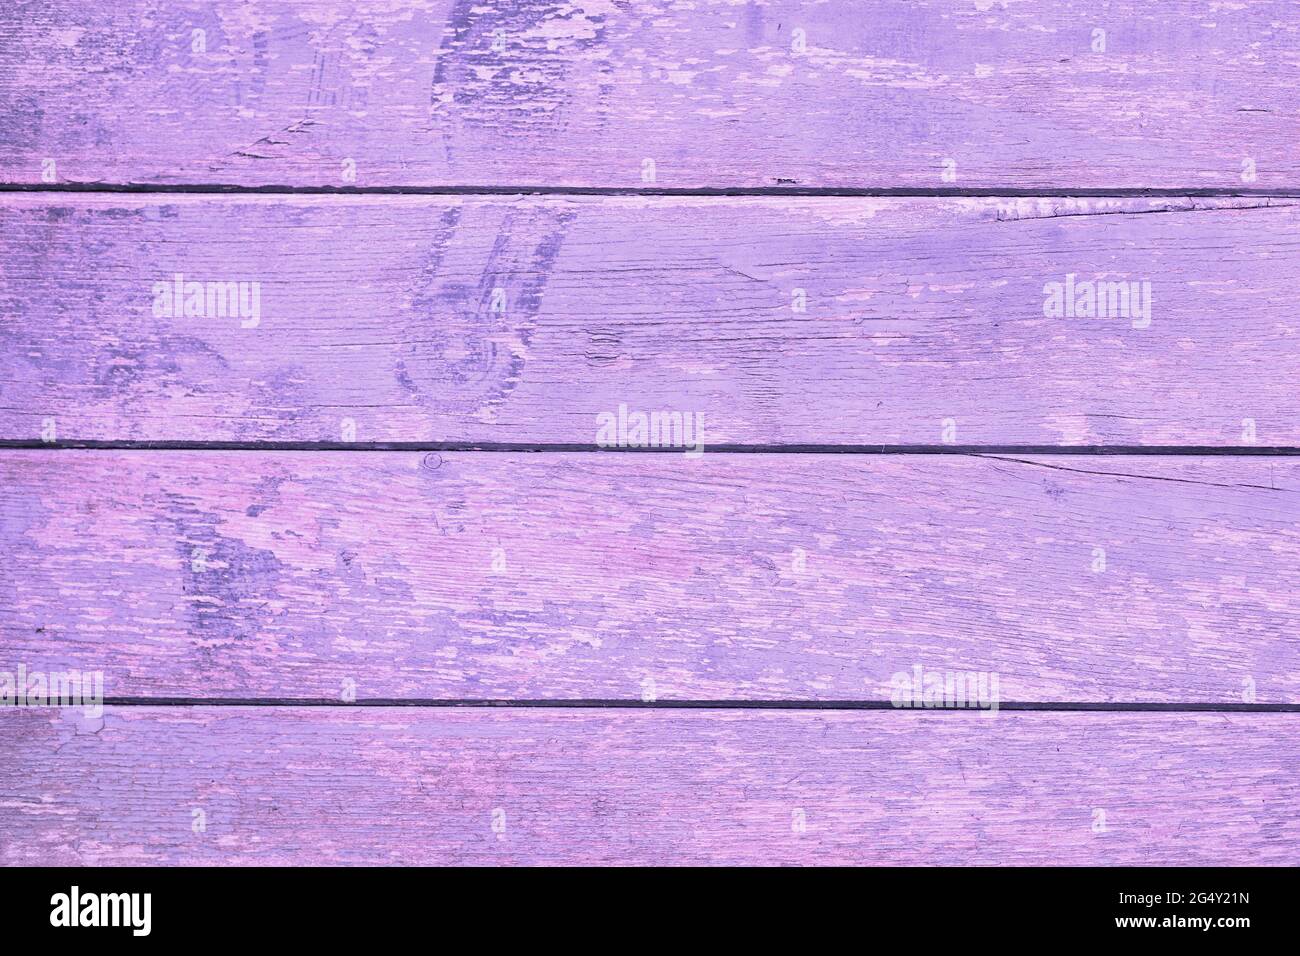 Background with horizontal old wooden planks with chipped paint Stock Photo